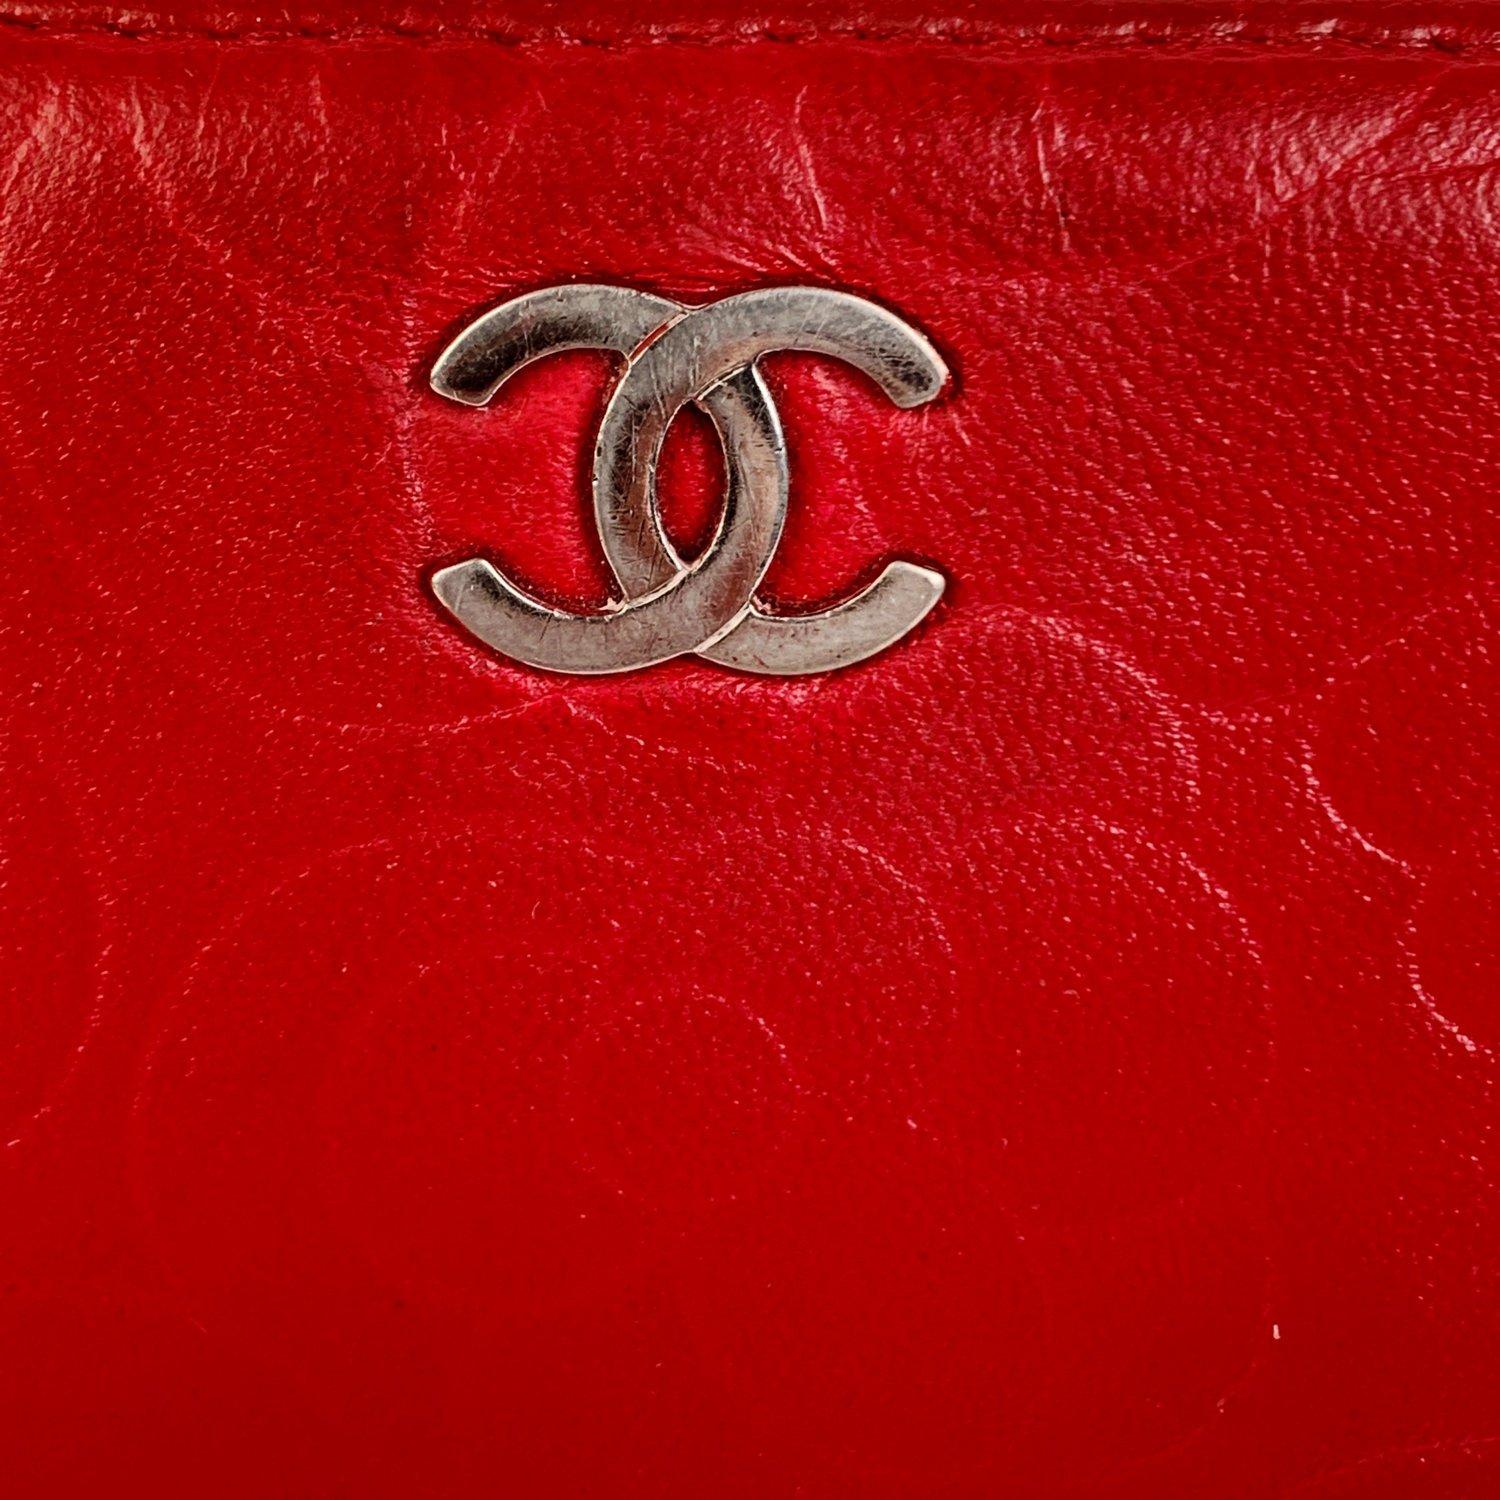 Red Chanel Wallpapers